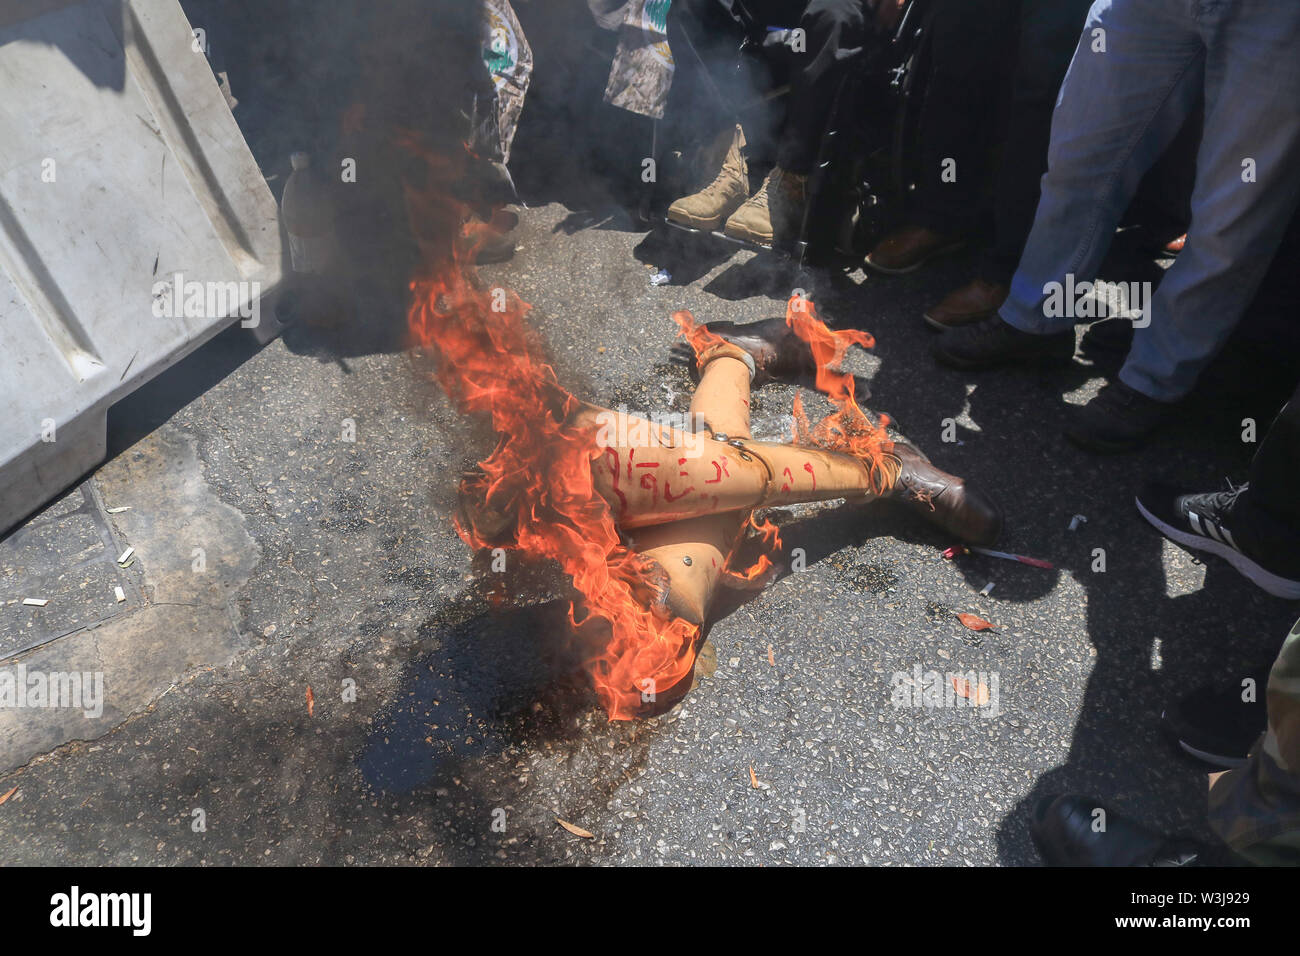 Beirut, Lebanon. 16th July, 2019. Retired soldiers of the Lebanese army set fire to a veteran's prosthetic legs as they protest against cuts in state pensions and over austerity budget measures being debated by in Parliament as planned cuts have unleashed a wave of public discontent, which have targeted pensions, wages, services and social benefits. Credit: amer ghazzal/Alamy Live News Stock Photo